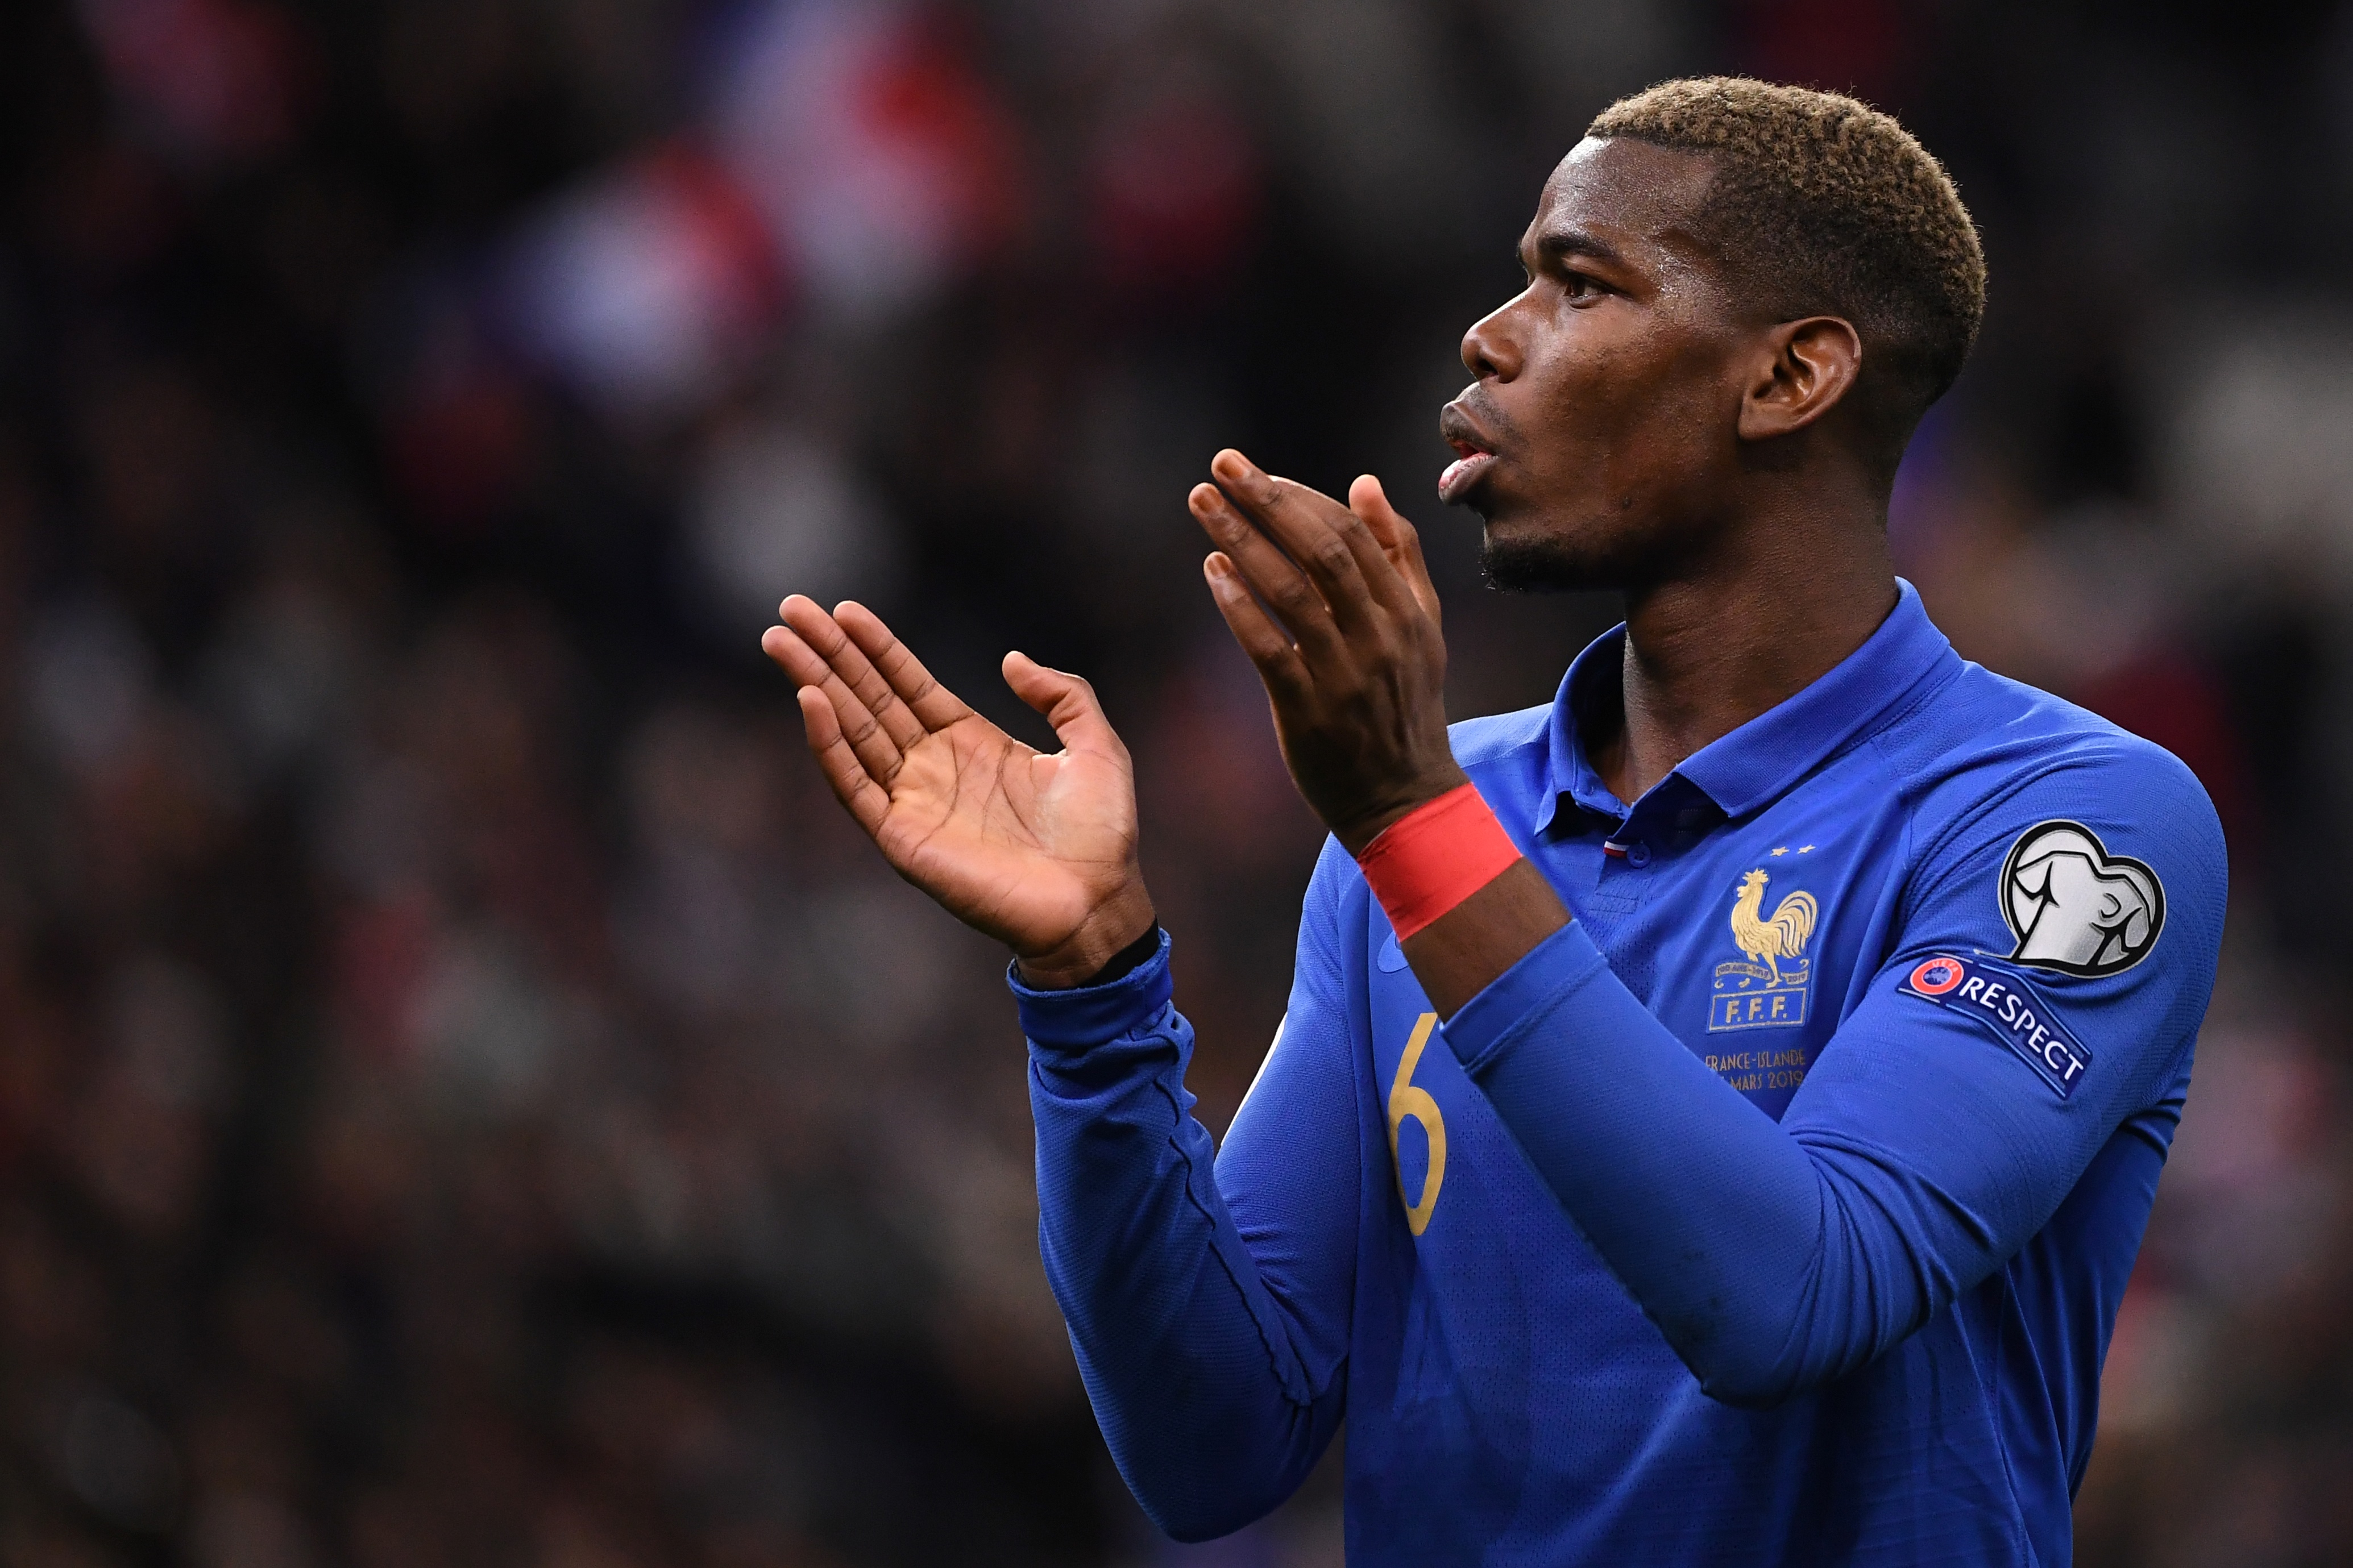 France's midfielder Paul Pogba celebrates after France's win of the UEFA Euro 2020 Group H qualification football match between France and Iceland at the Stade de France stadium in Saint-Denis, north of Paris, on March 25, 2019. - The match ended 4-0 for France. (Photo by FRANCK FIFE / AFP)        (Photo credit should read FRANCK FIFE/AFP/Getty Images)